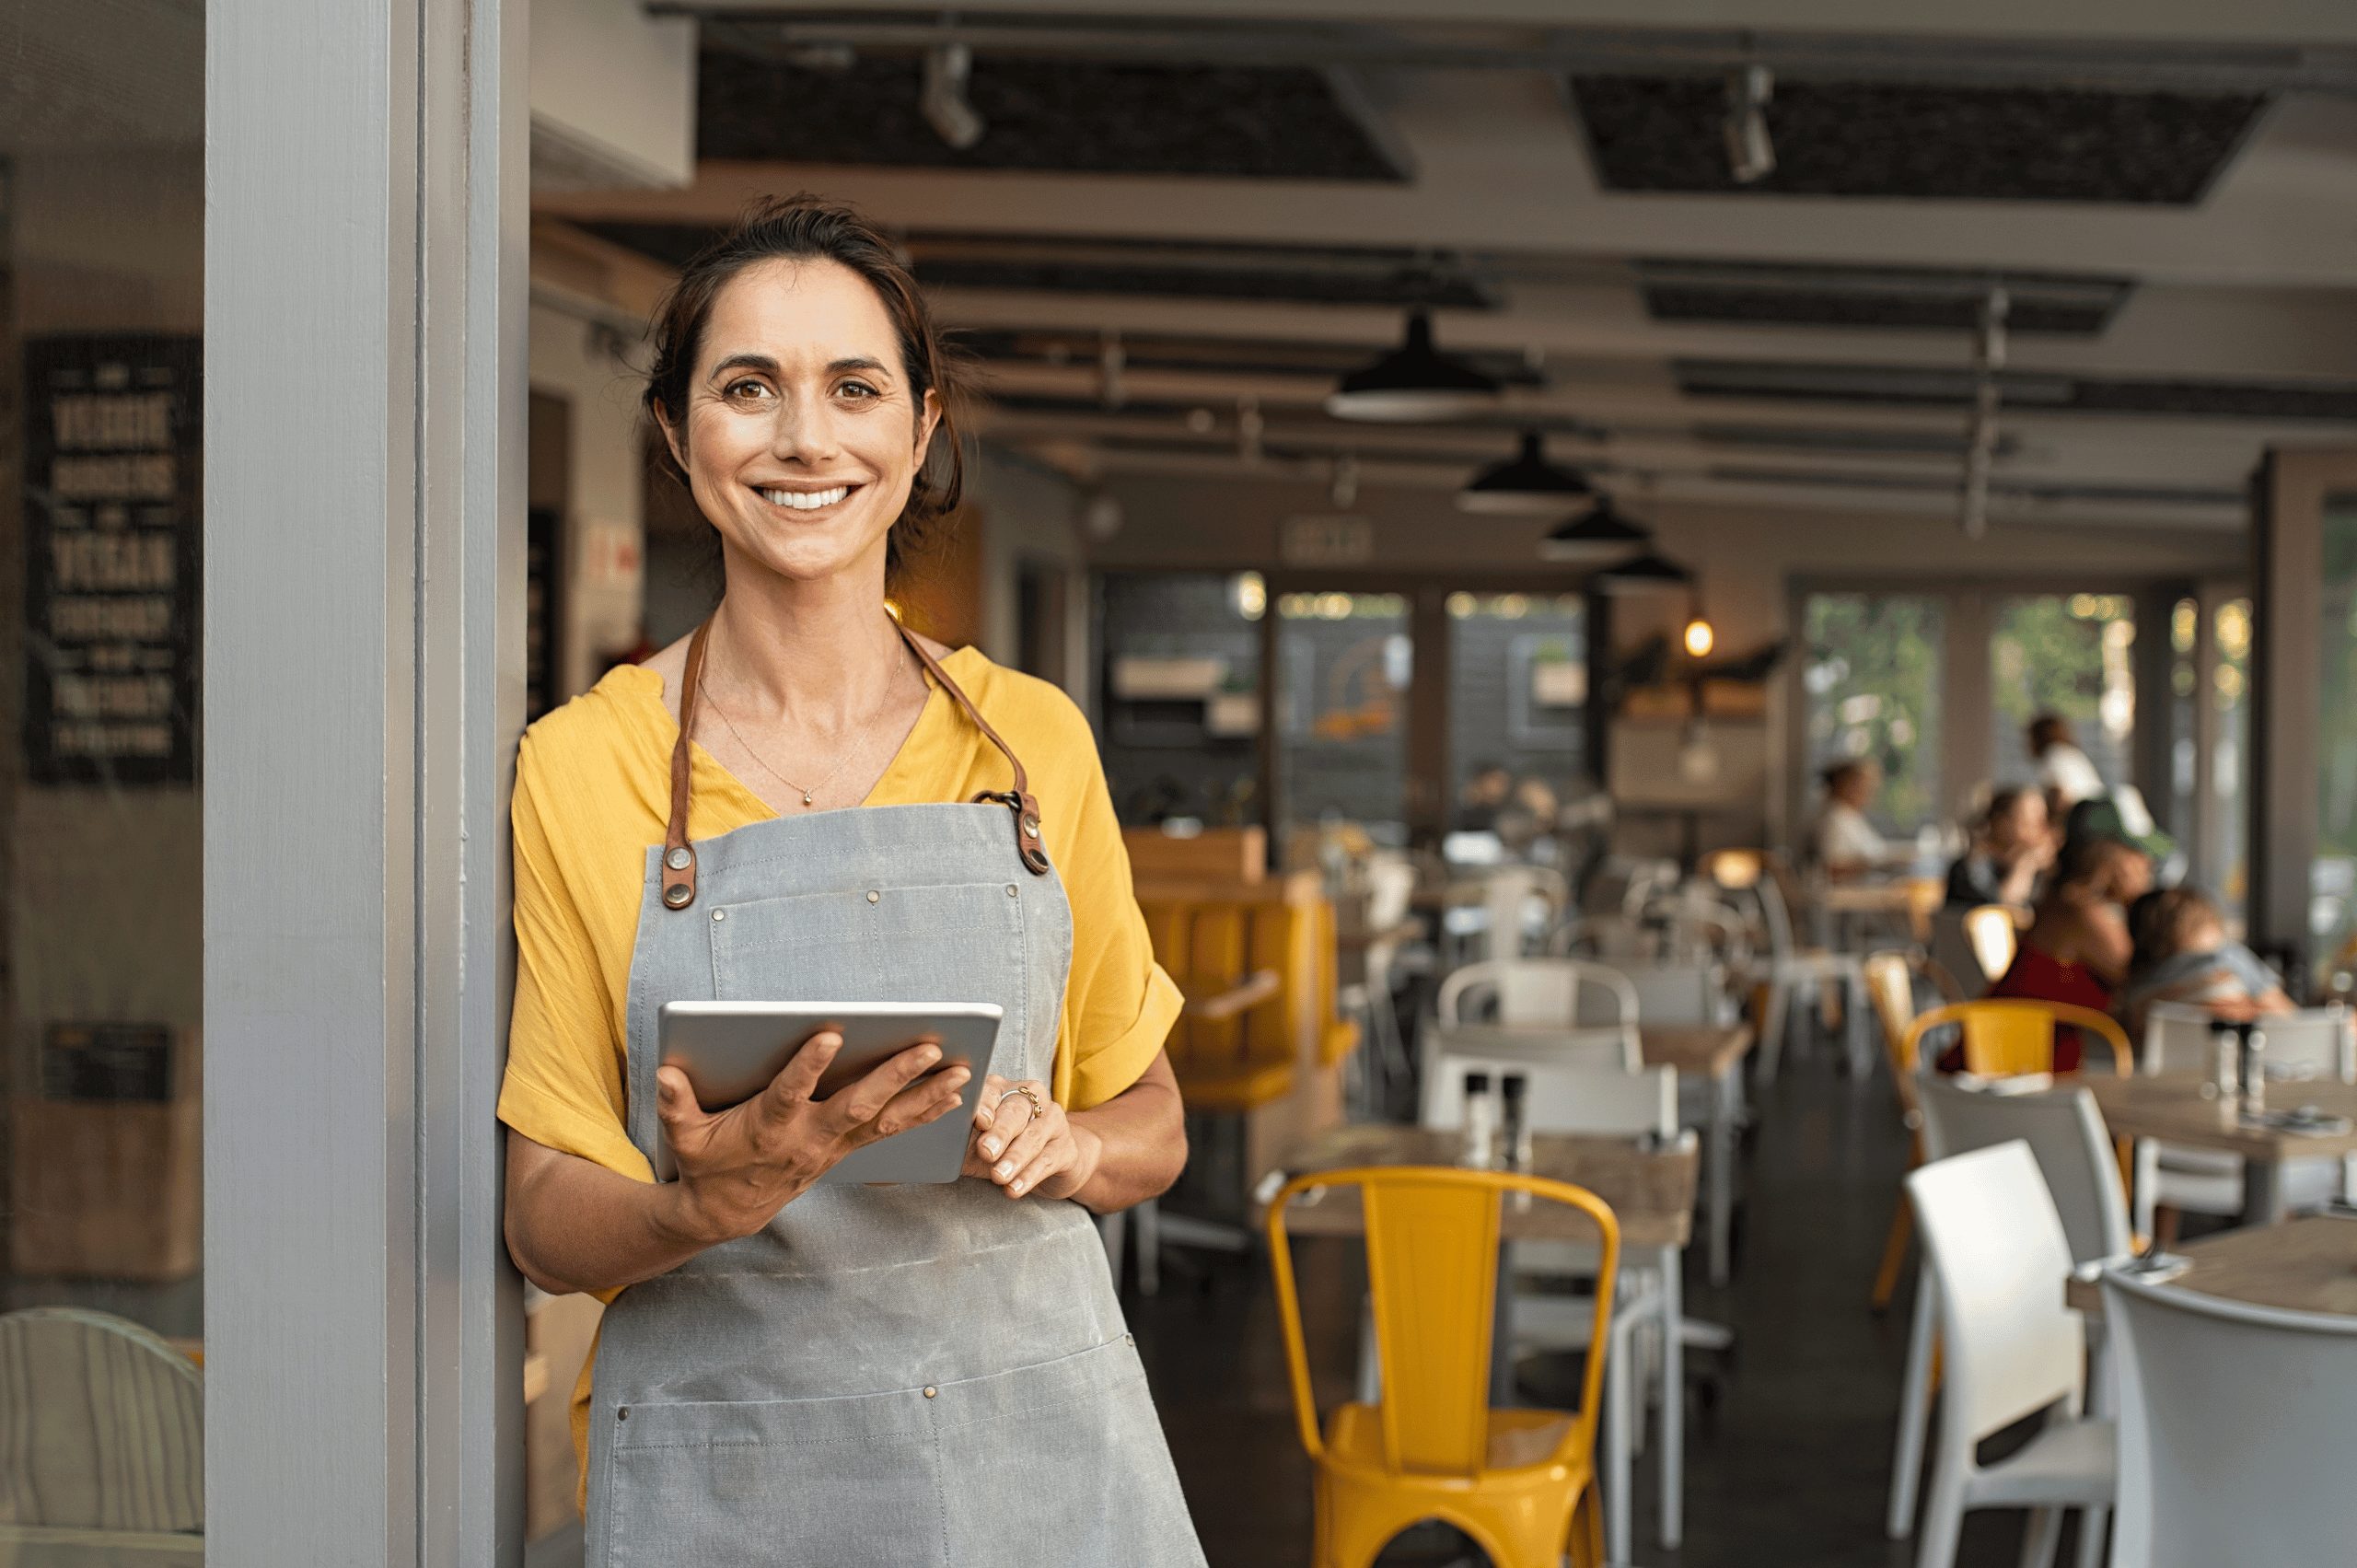 A small business woman standing in front of her store holding an iPad